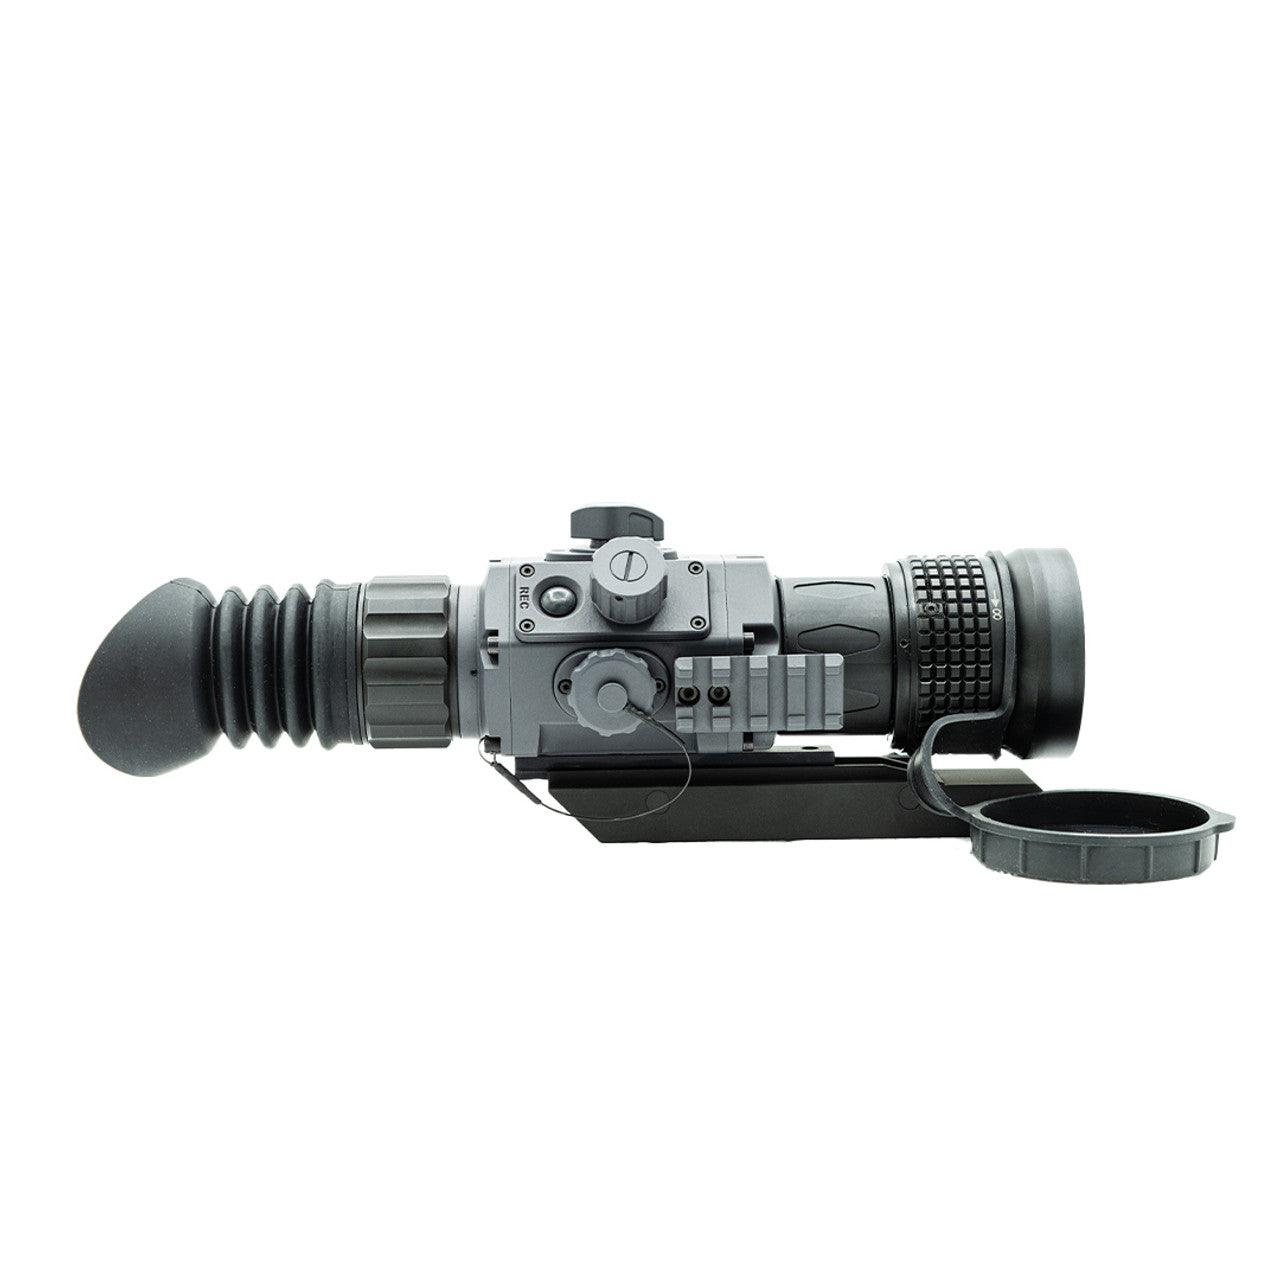 Armasight Contractor 320 Thermal Scope 50mm - NVU